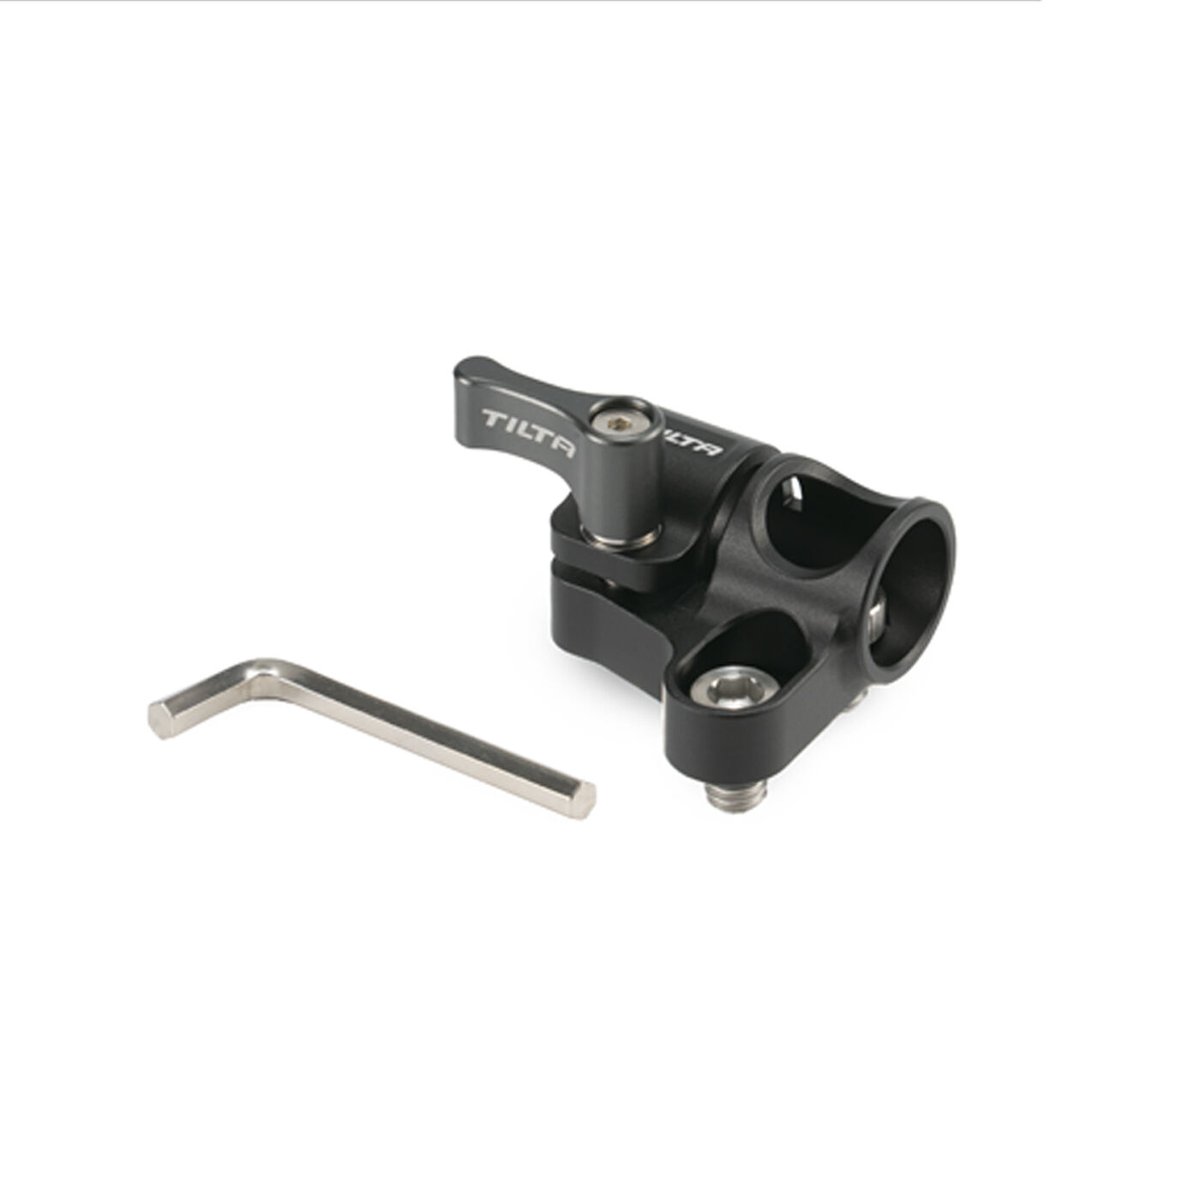 15mm Rod Holder to Dual 1/4